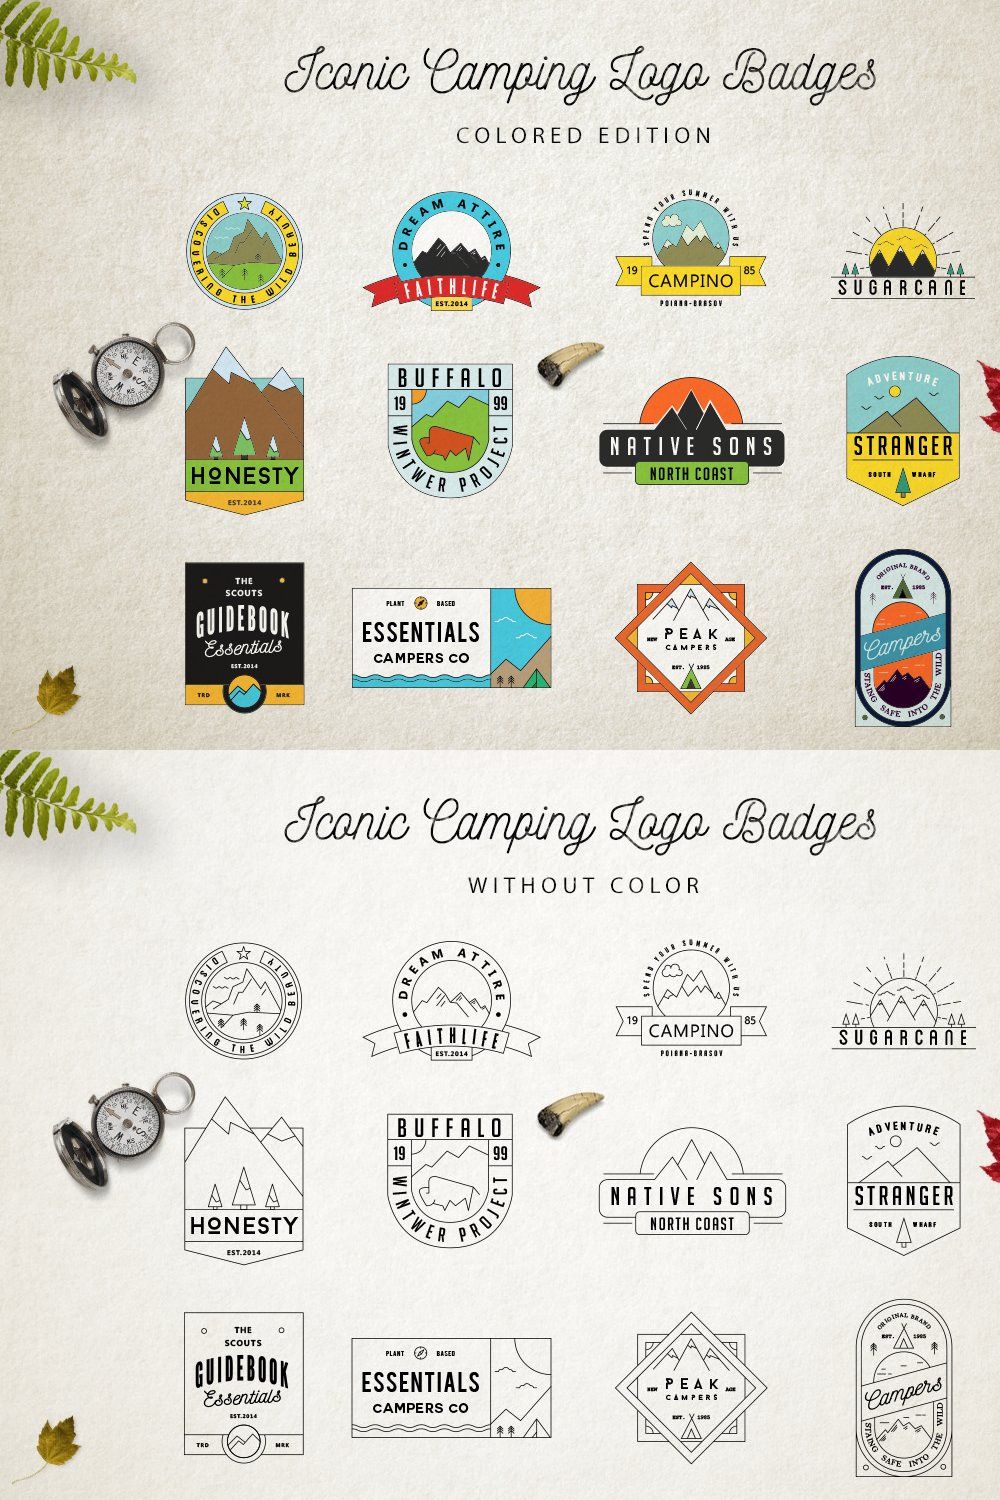 Iconic Camping Logo Badges 2 pinterest preview image.